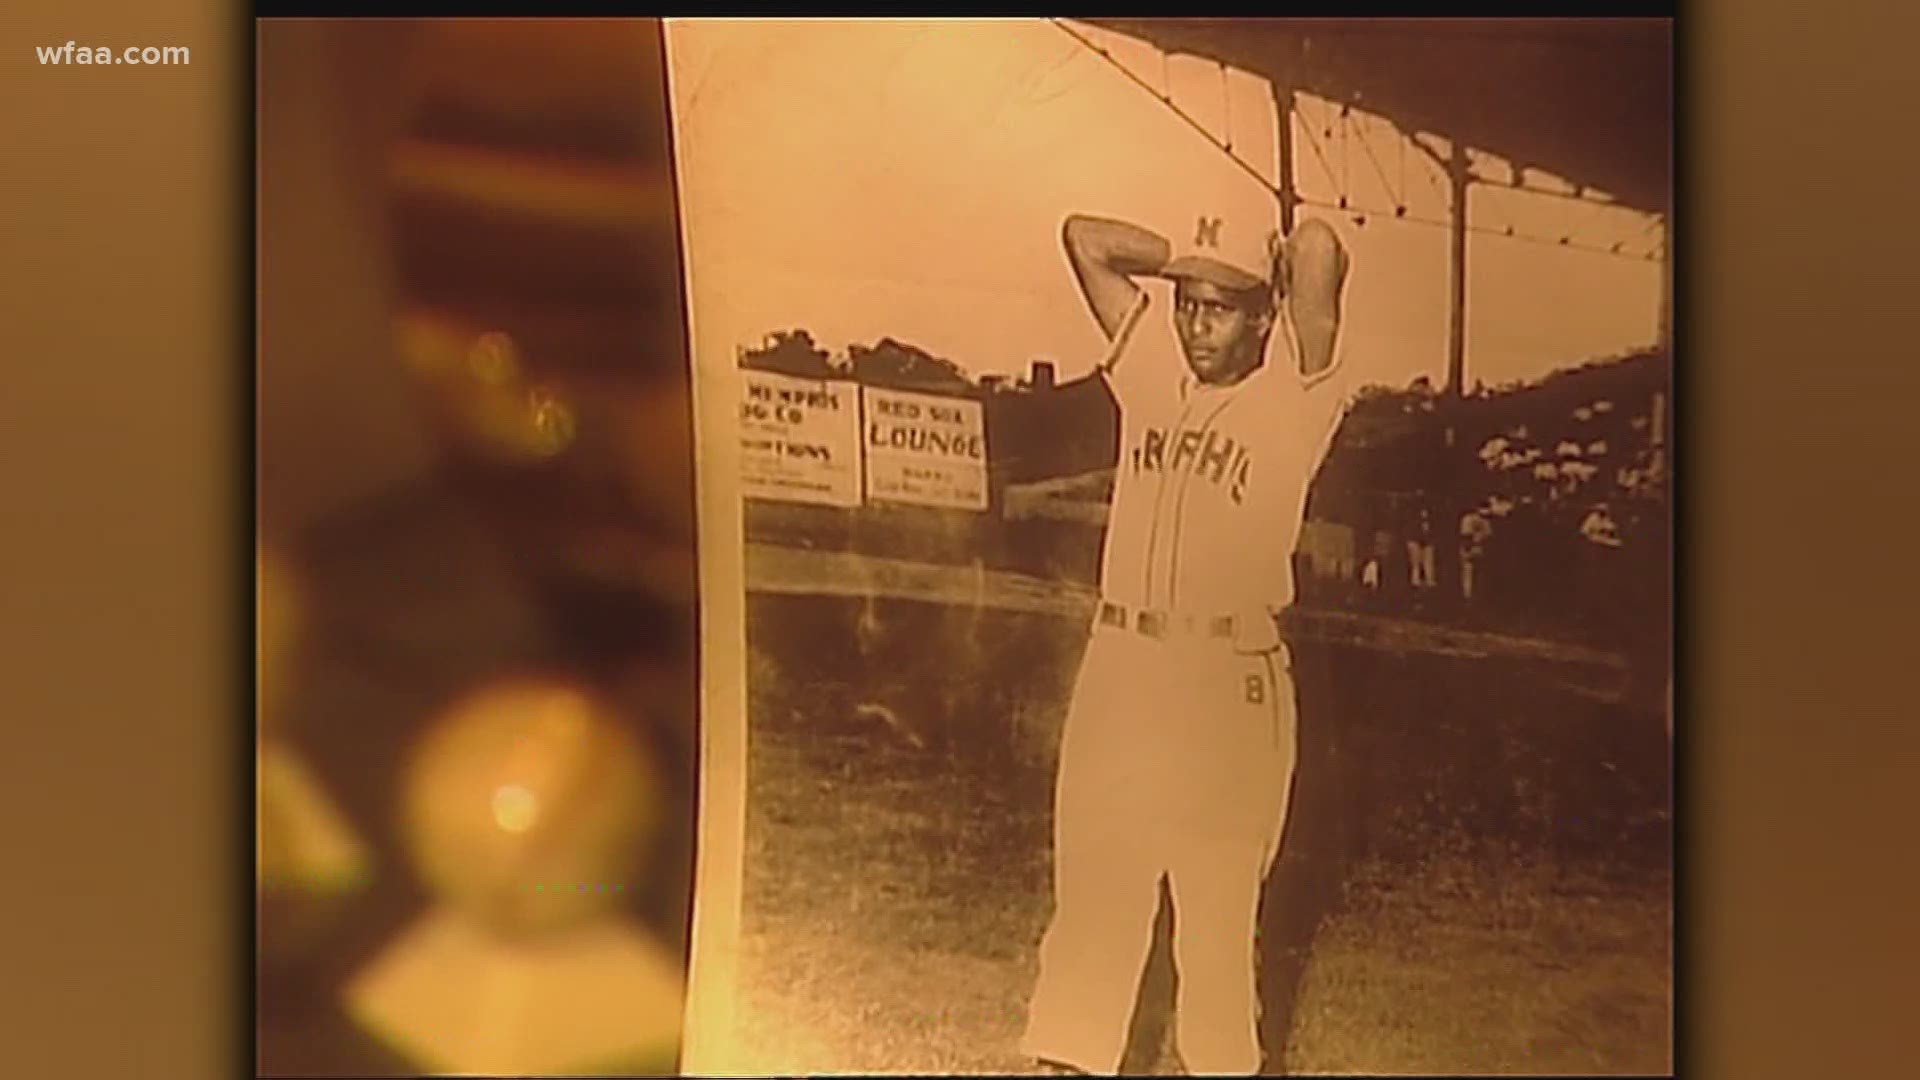 The Negro Leagues celebrated 100 years in 2020. Joe Trahan takes us back to 2007 for a story he did on local connections to the Negro Leagues.